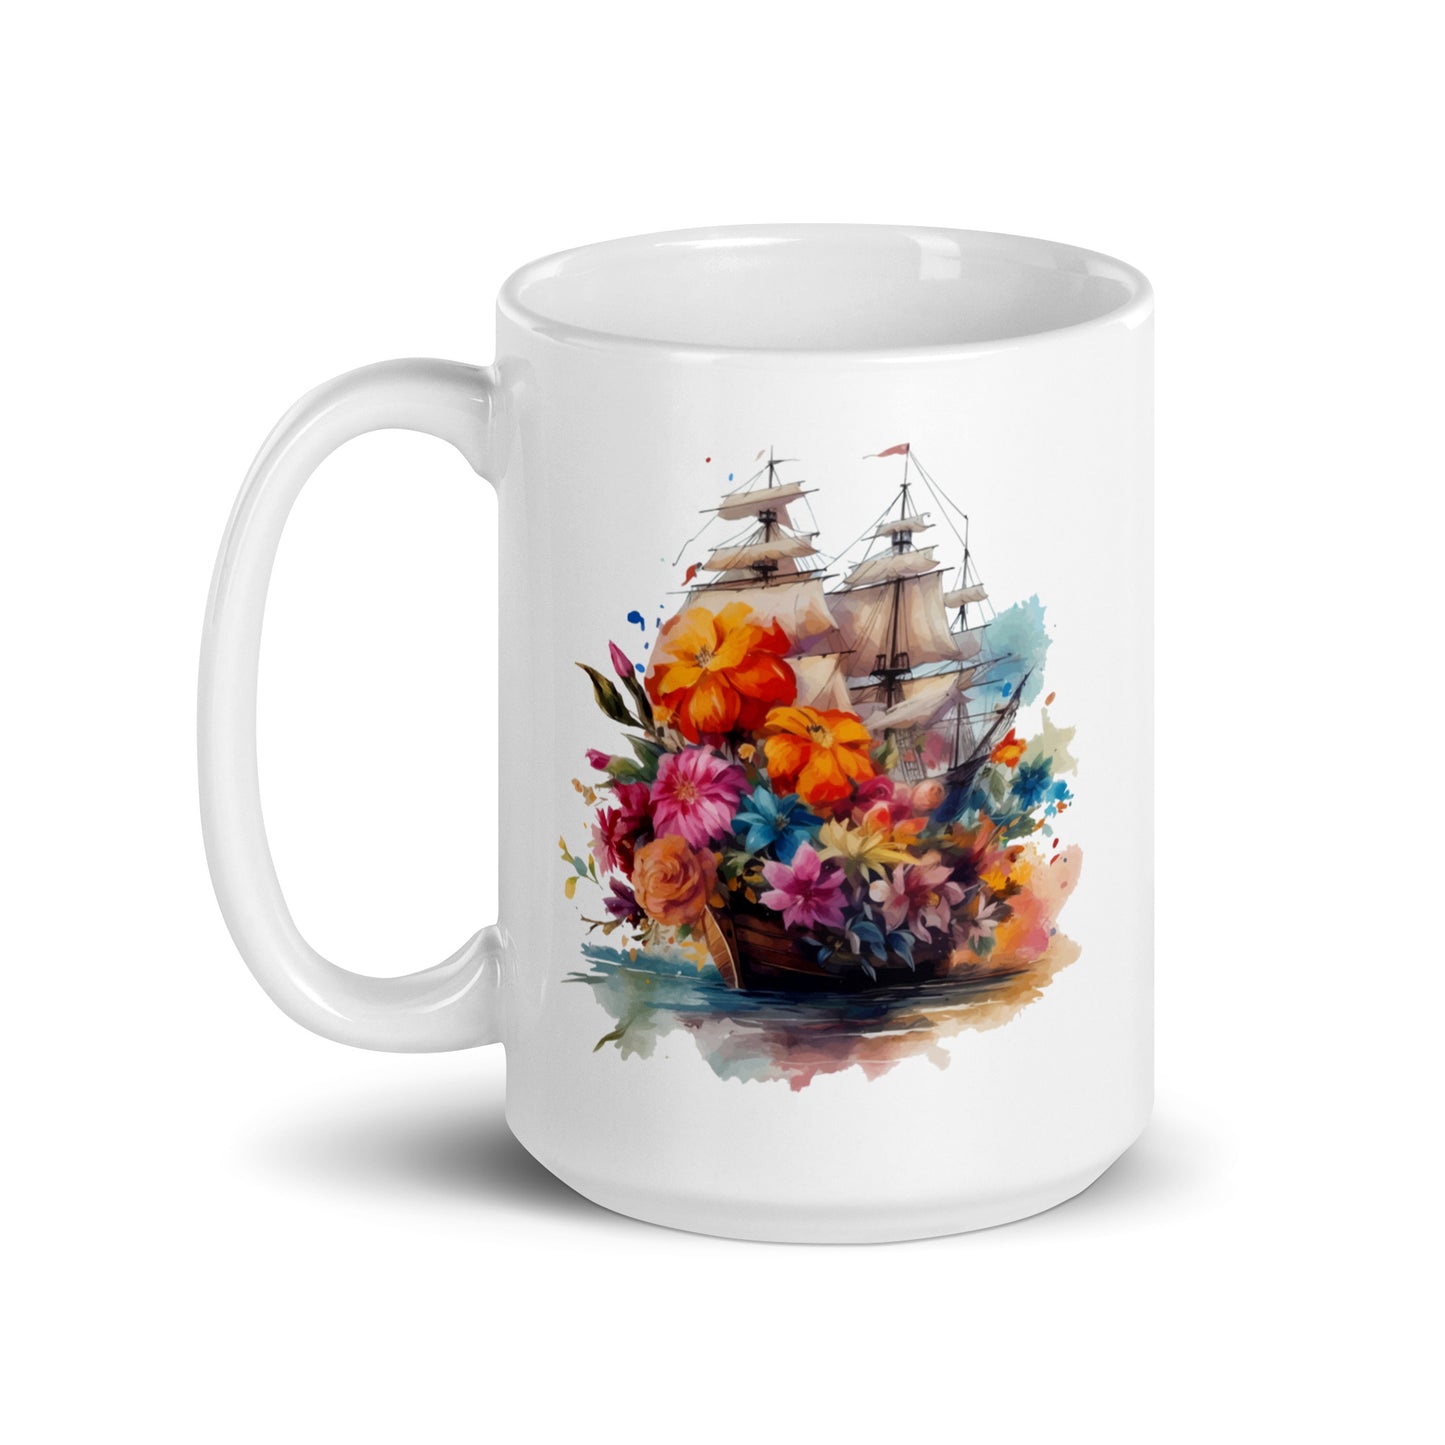 Frigate and flowers, Ship with sails flowers art composition, Sailboat illustration - White glossy mug